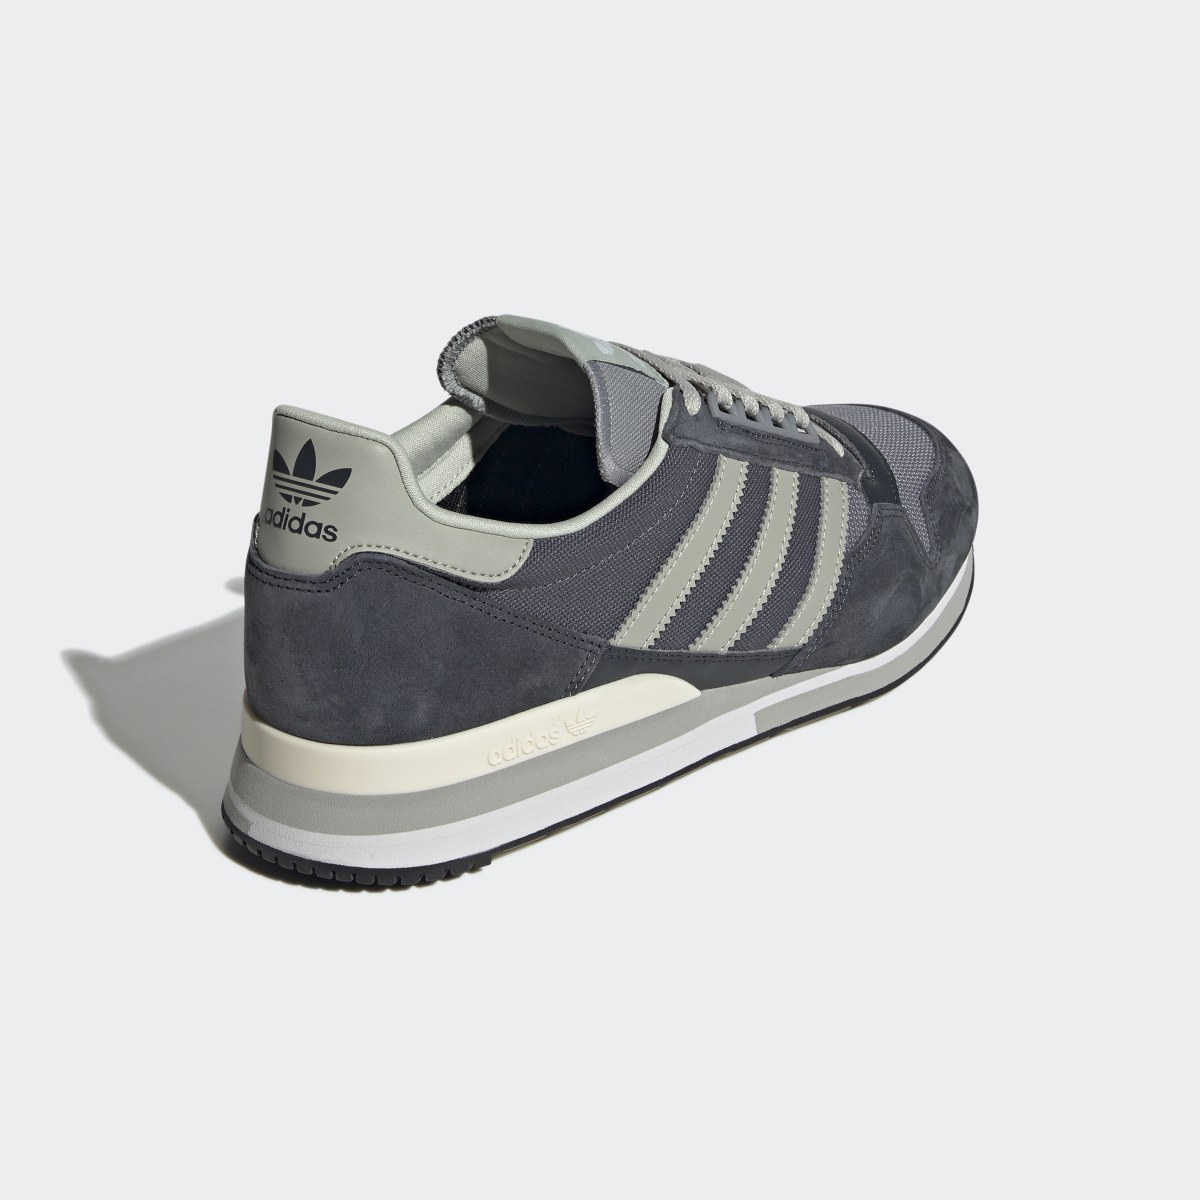 Adidas ZX 500 Shoes. 6